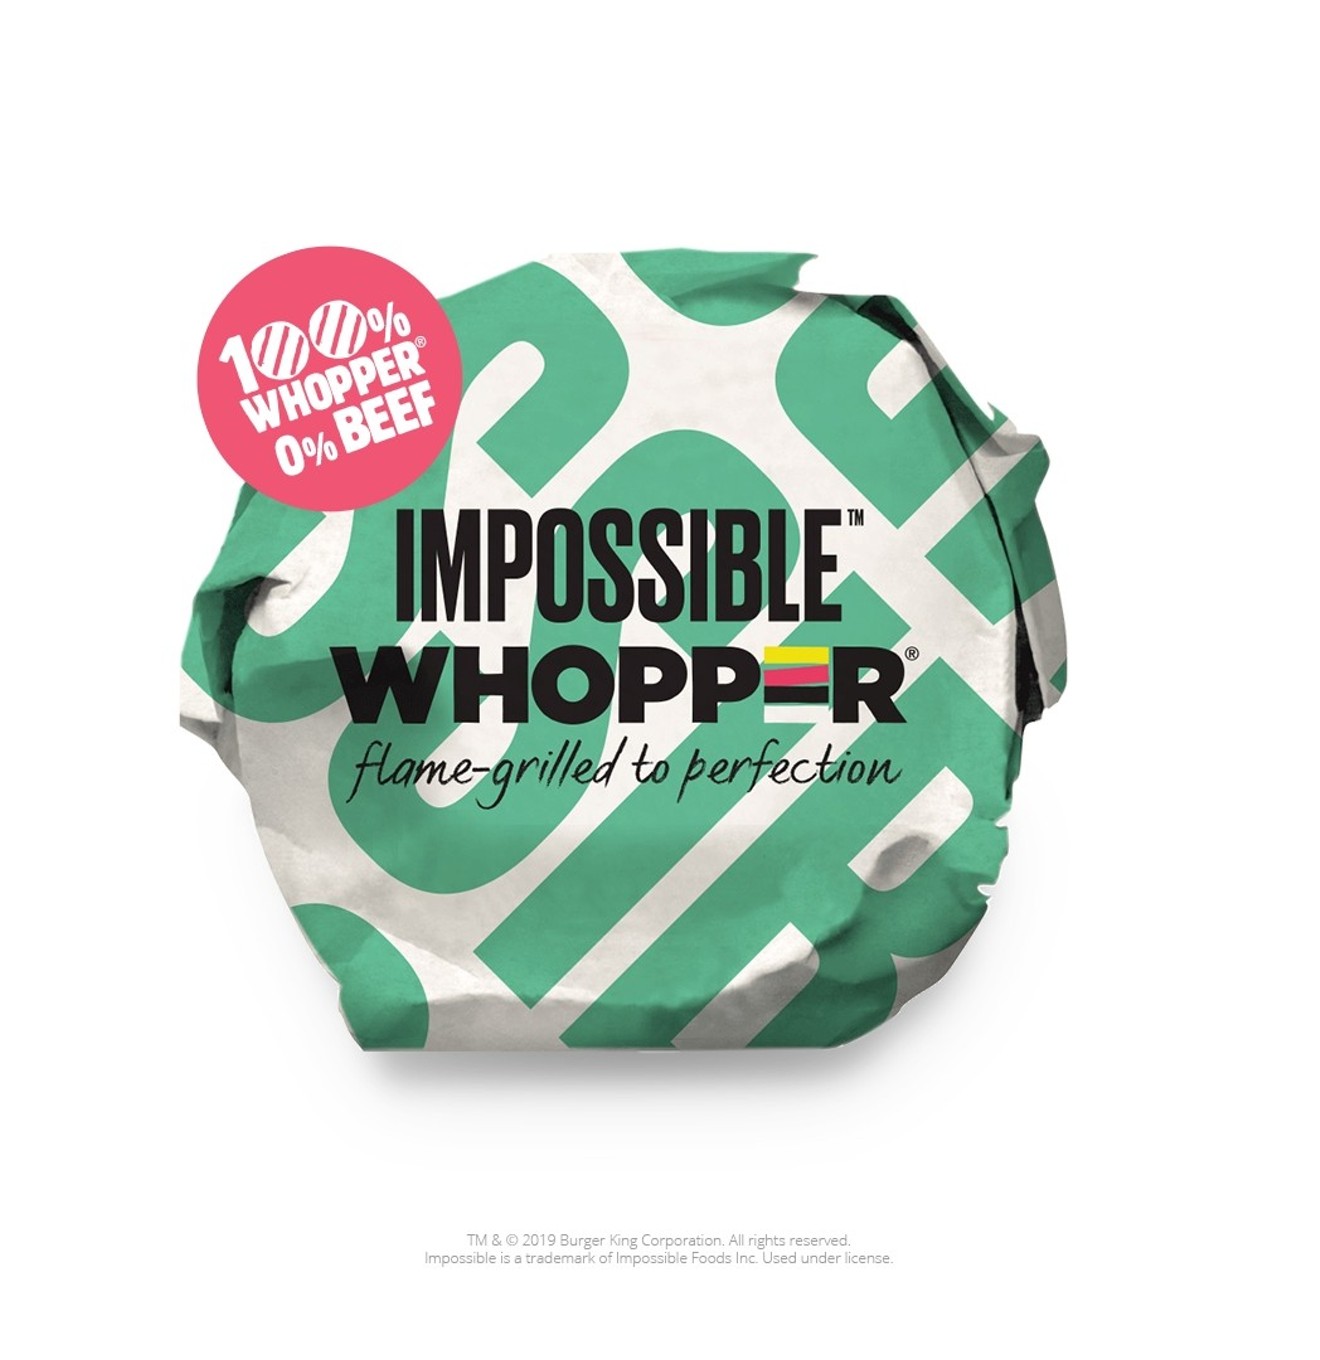 No f**king cow in this Impossible Whopper